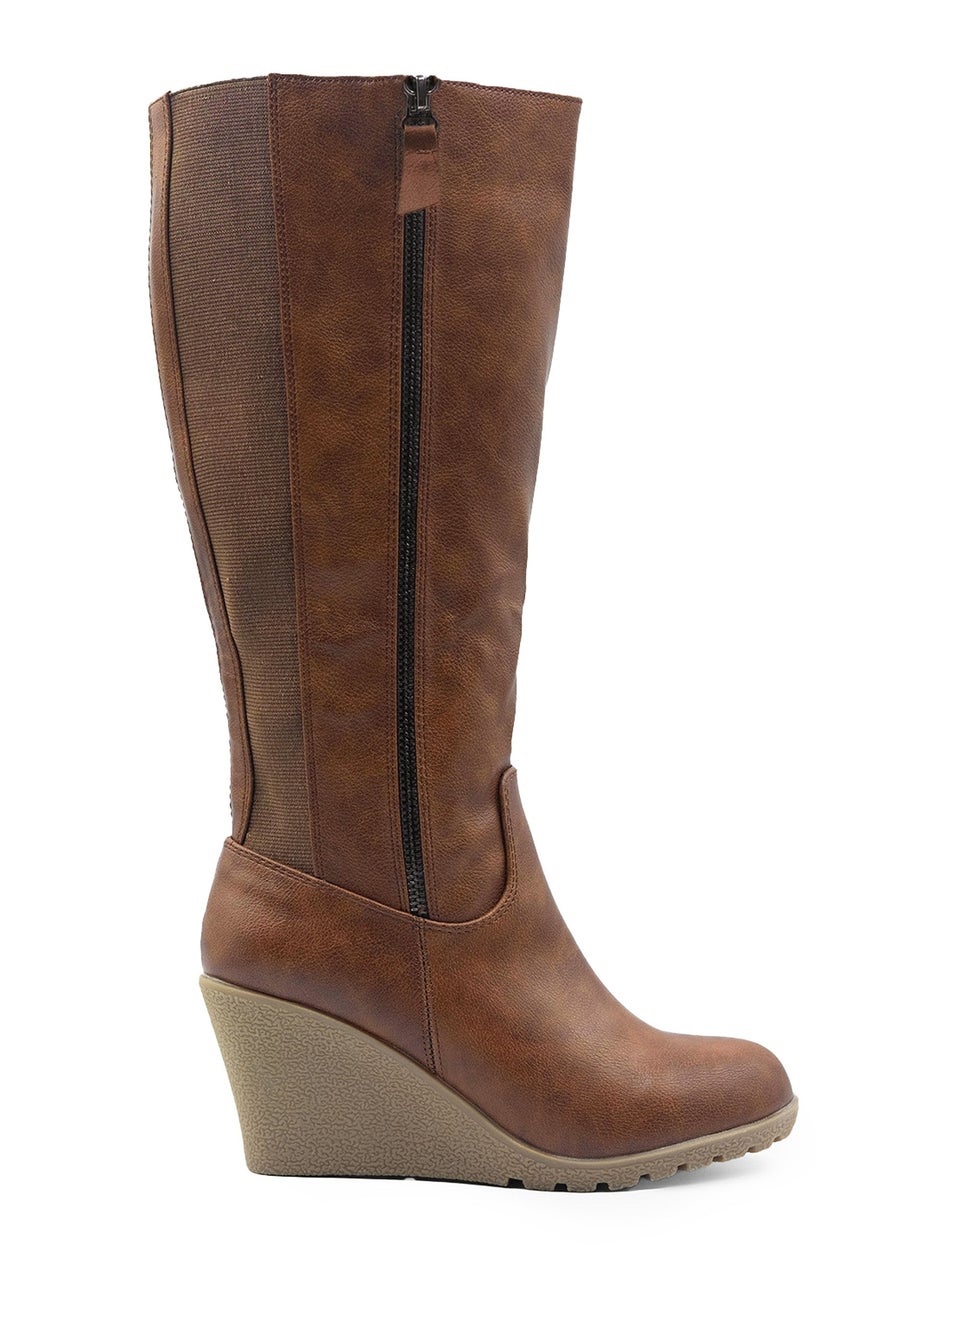 Where's That From Brown Pu Lara Mid Calf Boots